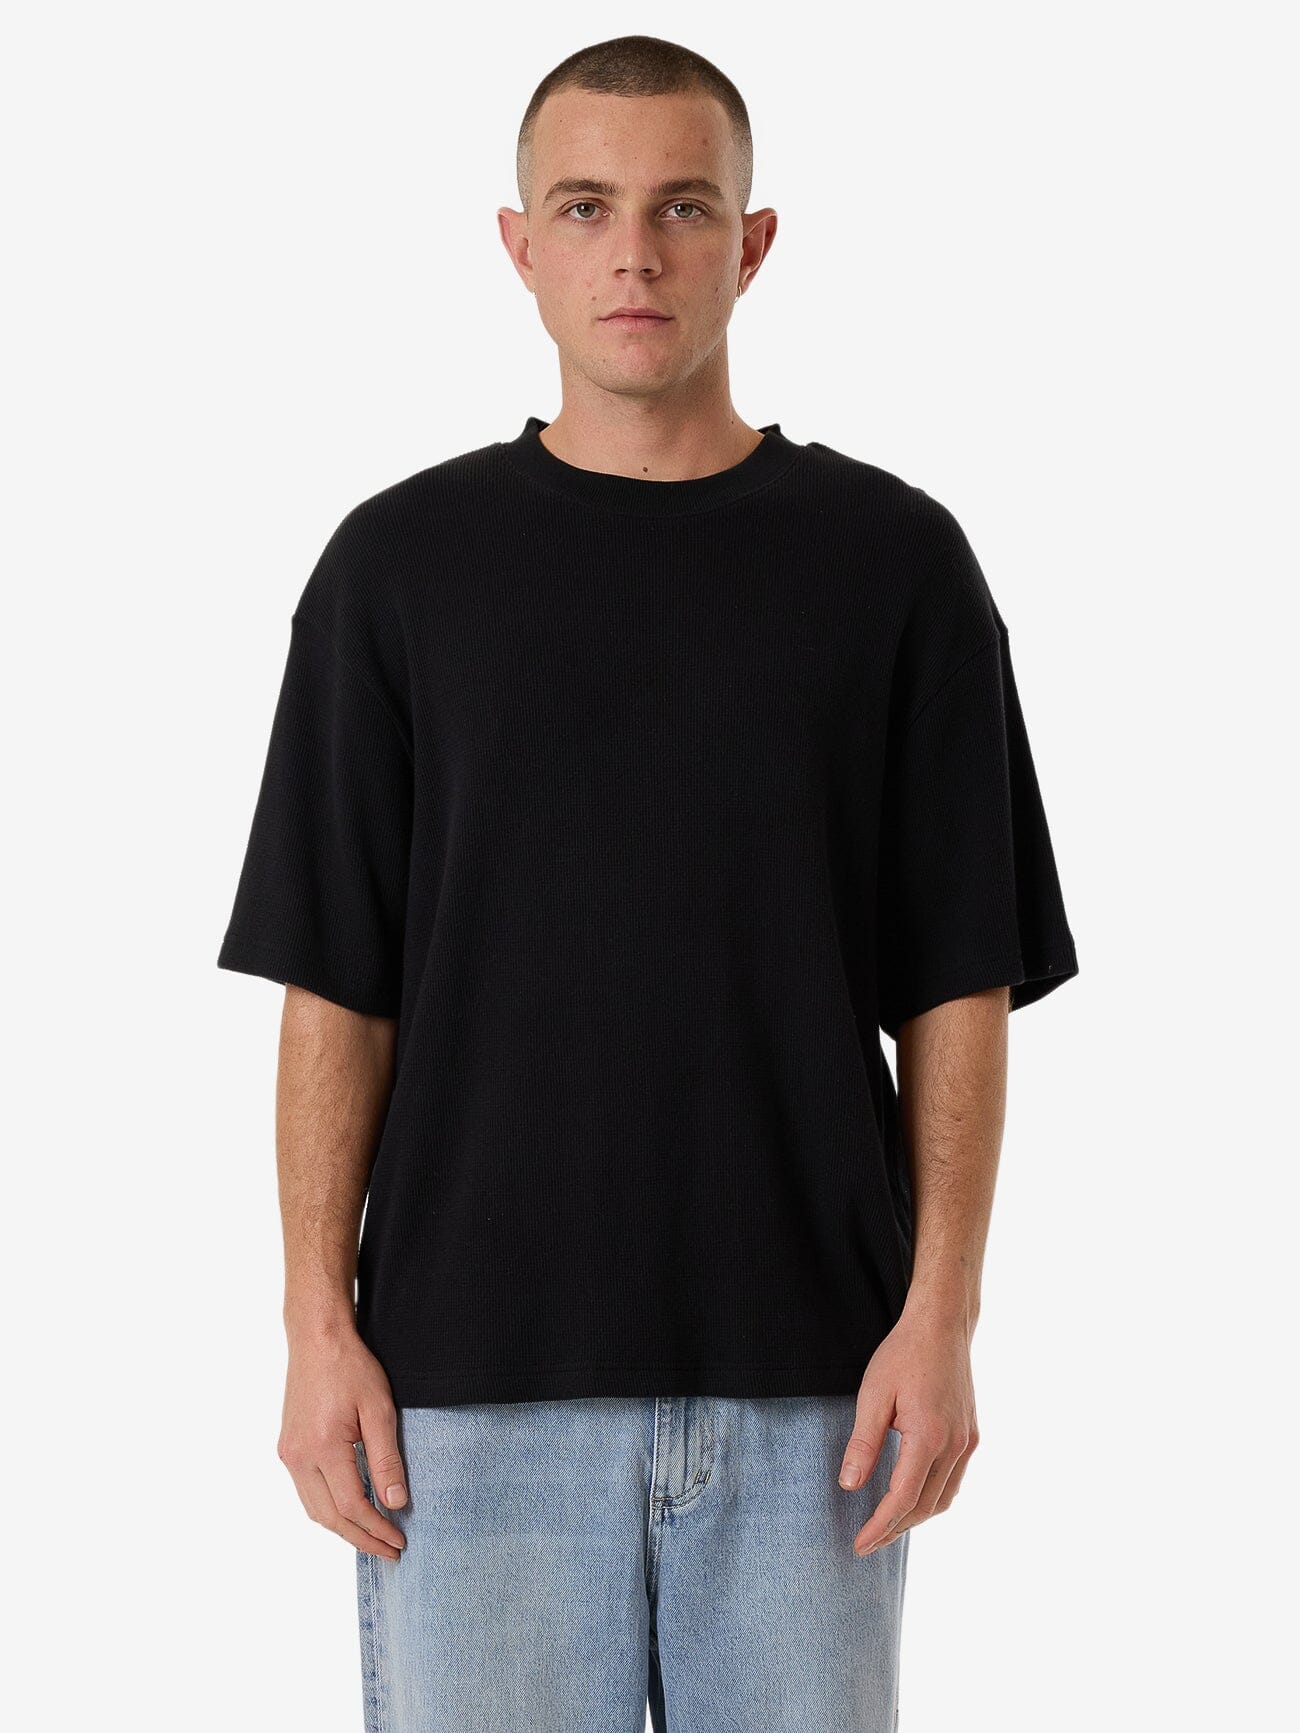 Existencial Waffle Box Fit Oversize Short Tee - Black